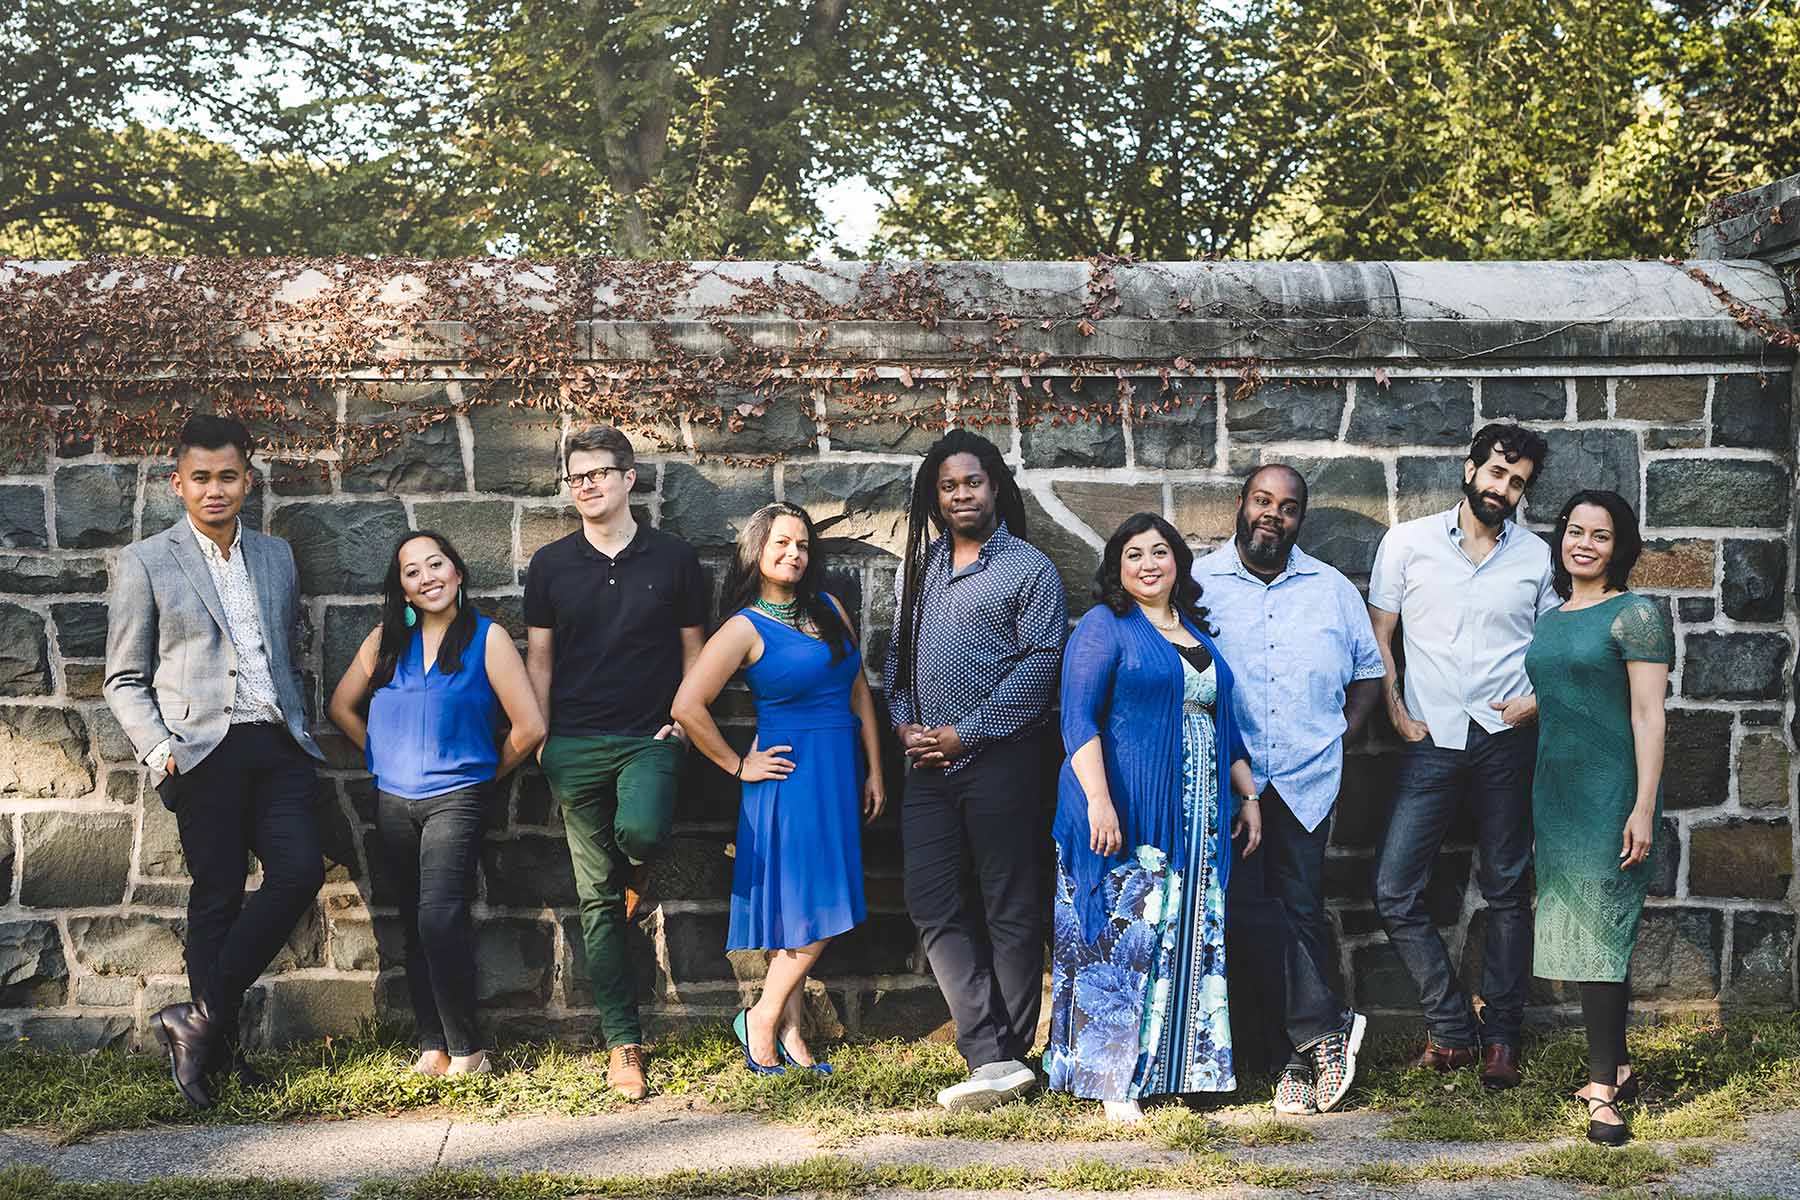 The Kaleidoscope Vocal Ensemble, founded in 2019 with the intention of advocating for more diversity in music, will present a concert and workshop. 